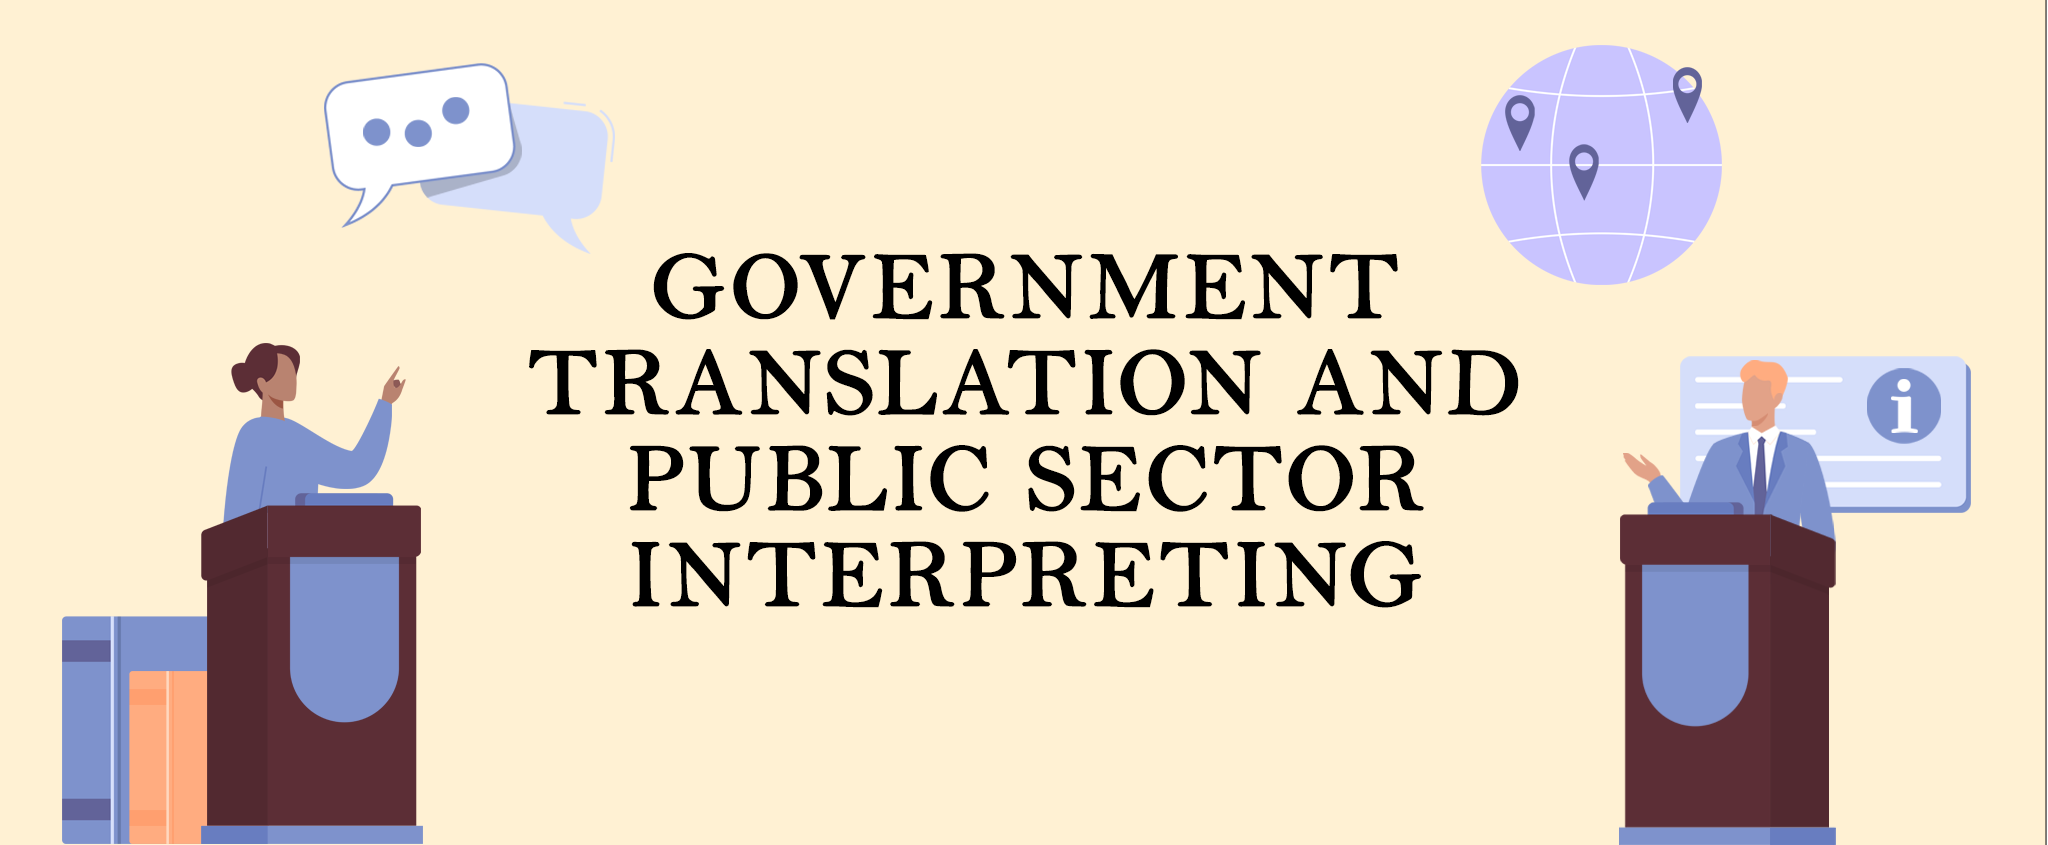 Government Translation and Public Sector Interpreting